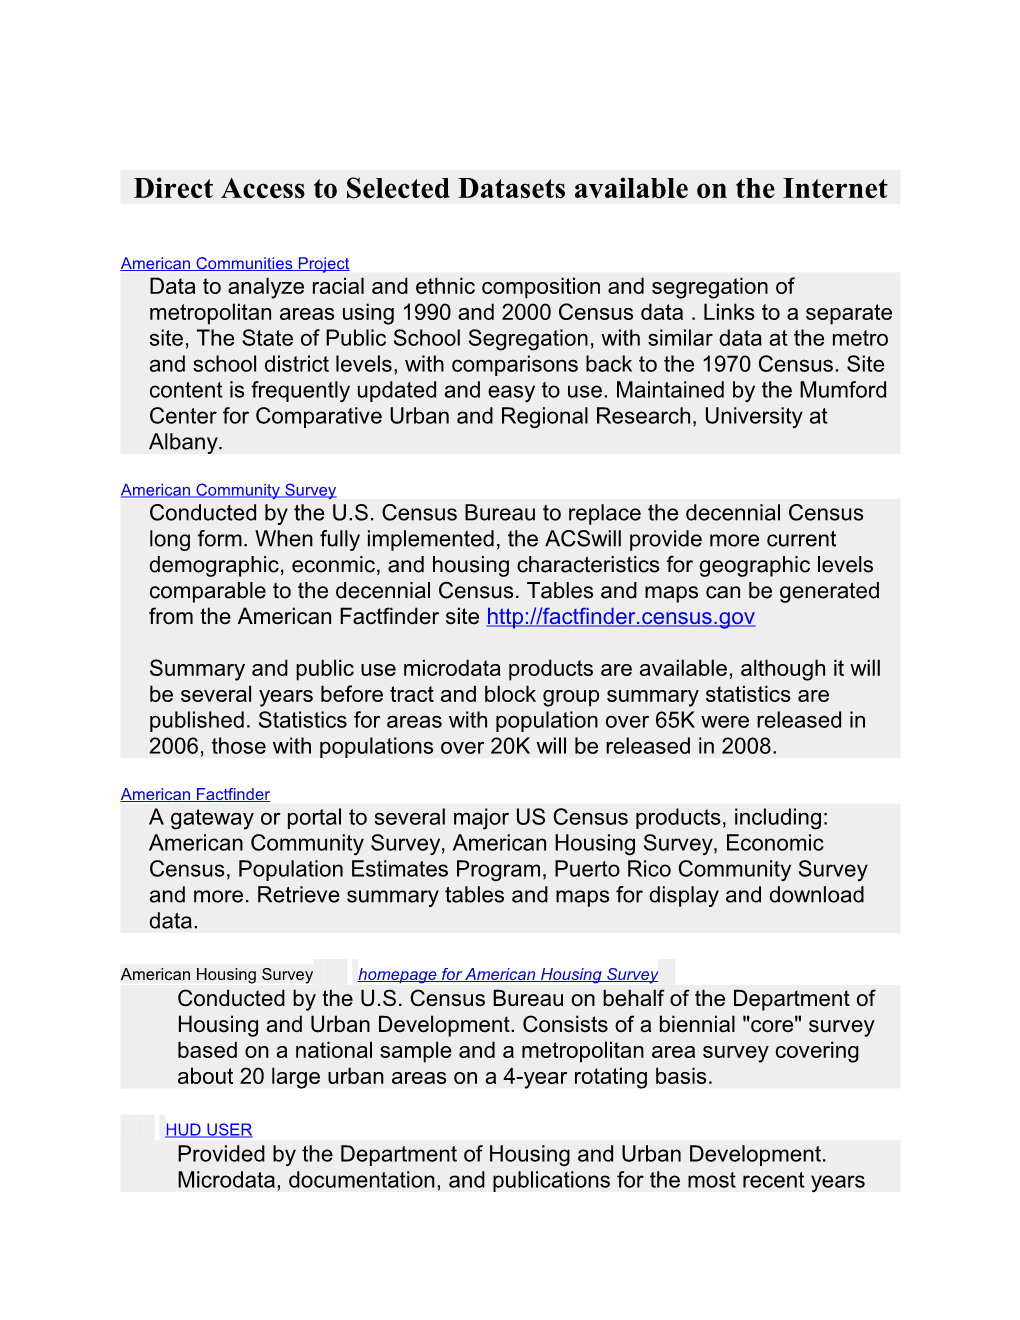 Direct Access to Selected Datasets Available on the Internet